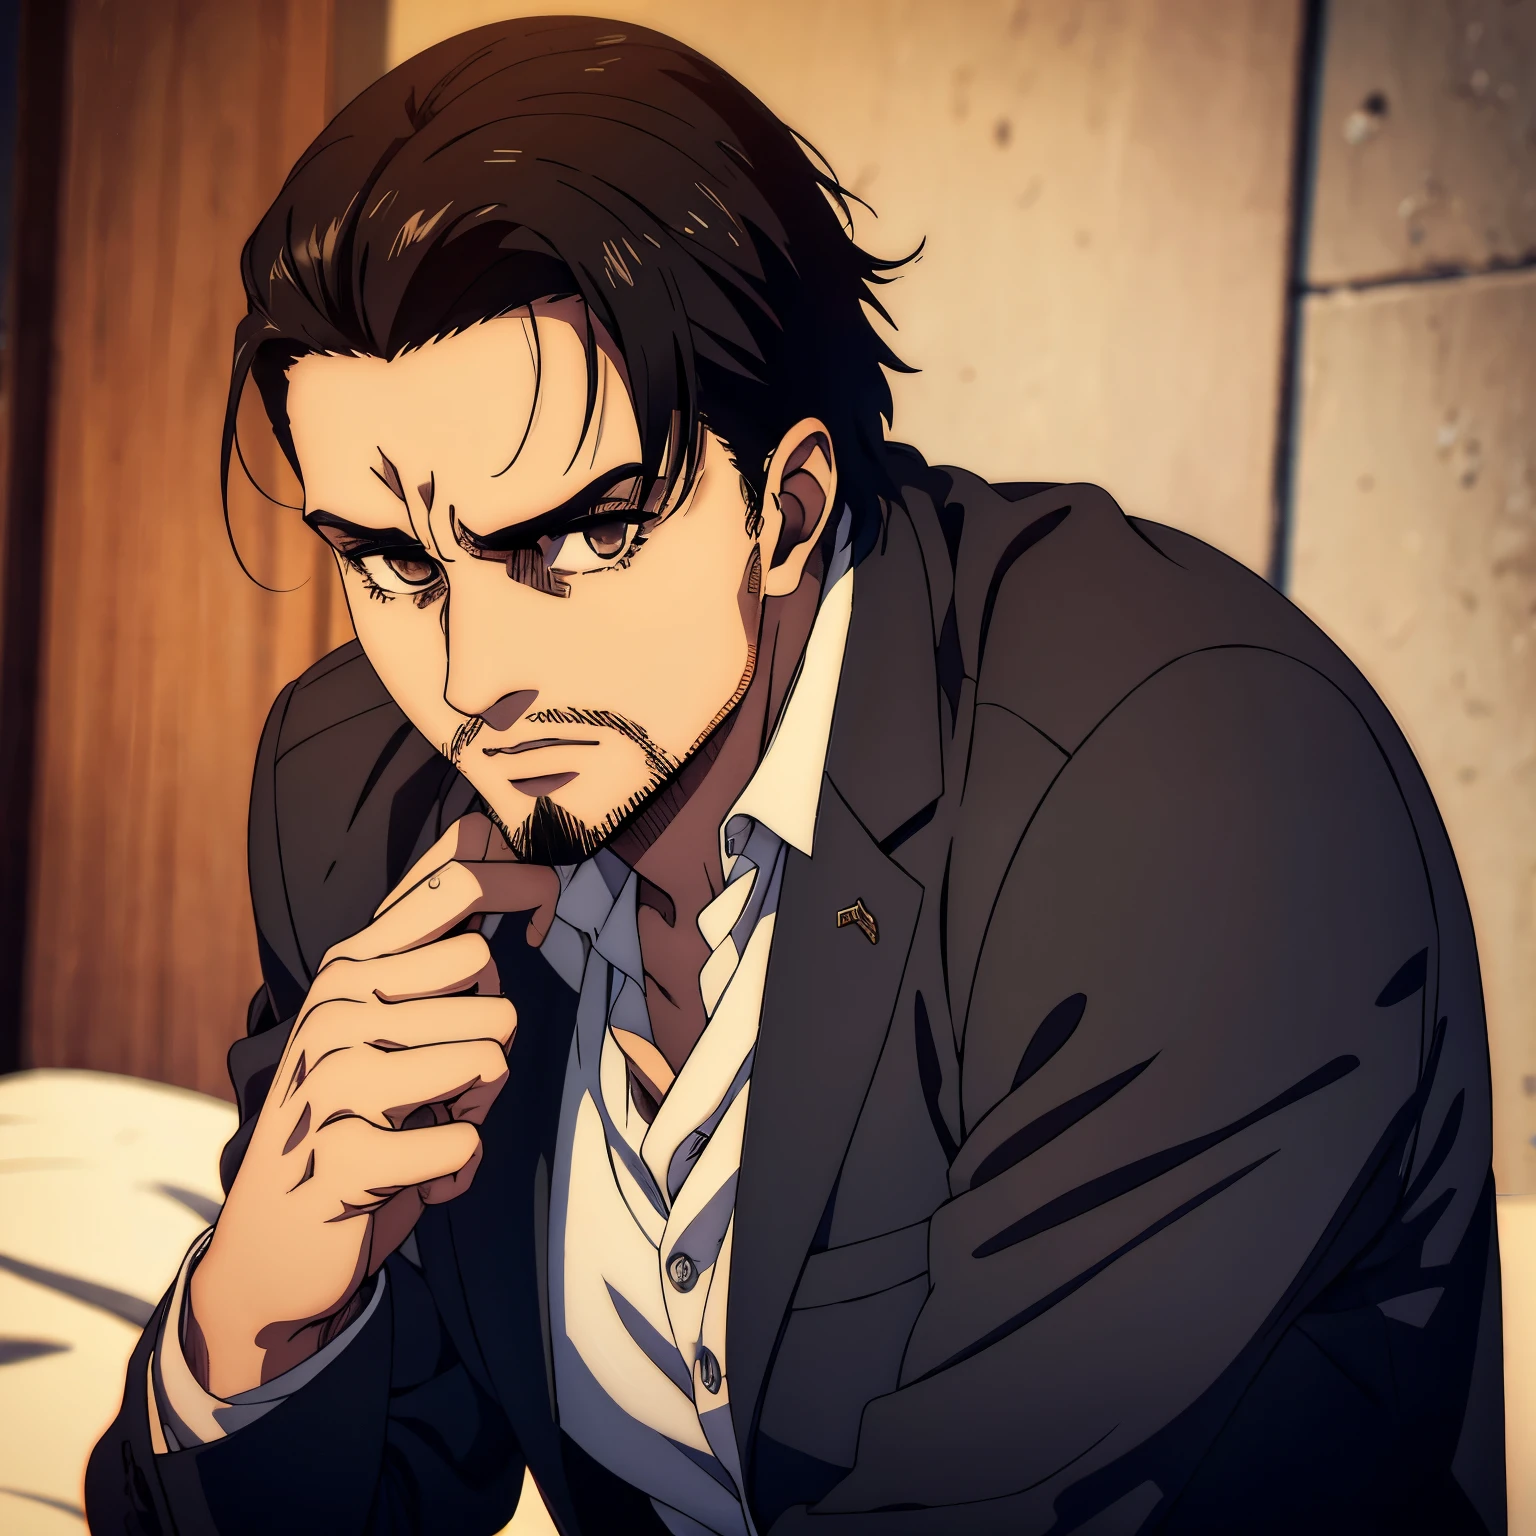 Teen male character with brown eyes and  short black  hair in the Mappa art style. He is depicted in a grey shirt. He has short beard  in extended goatee style .He is also suit. He is also fair. The artwork should have the best quality, with ultra-detailed and realistic features. The color palette should be vivid, and the lighting should emphasize the character's facial structure and expression.